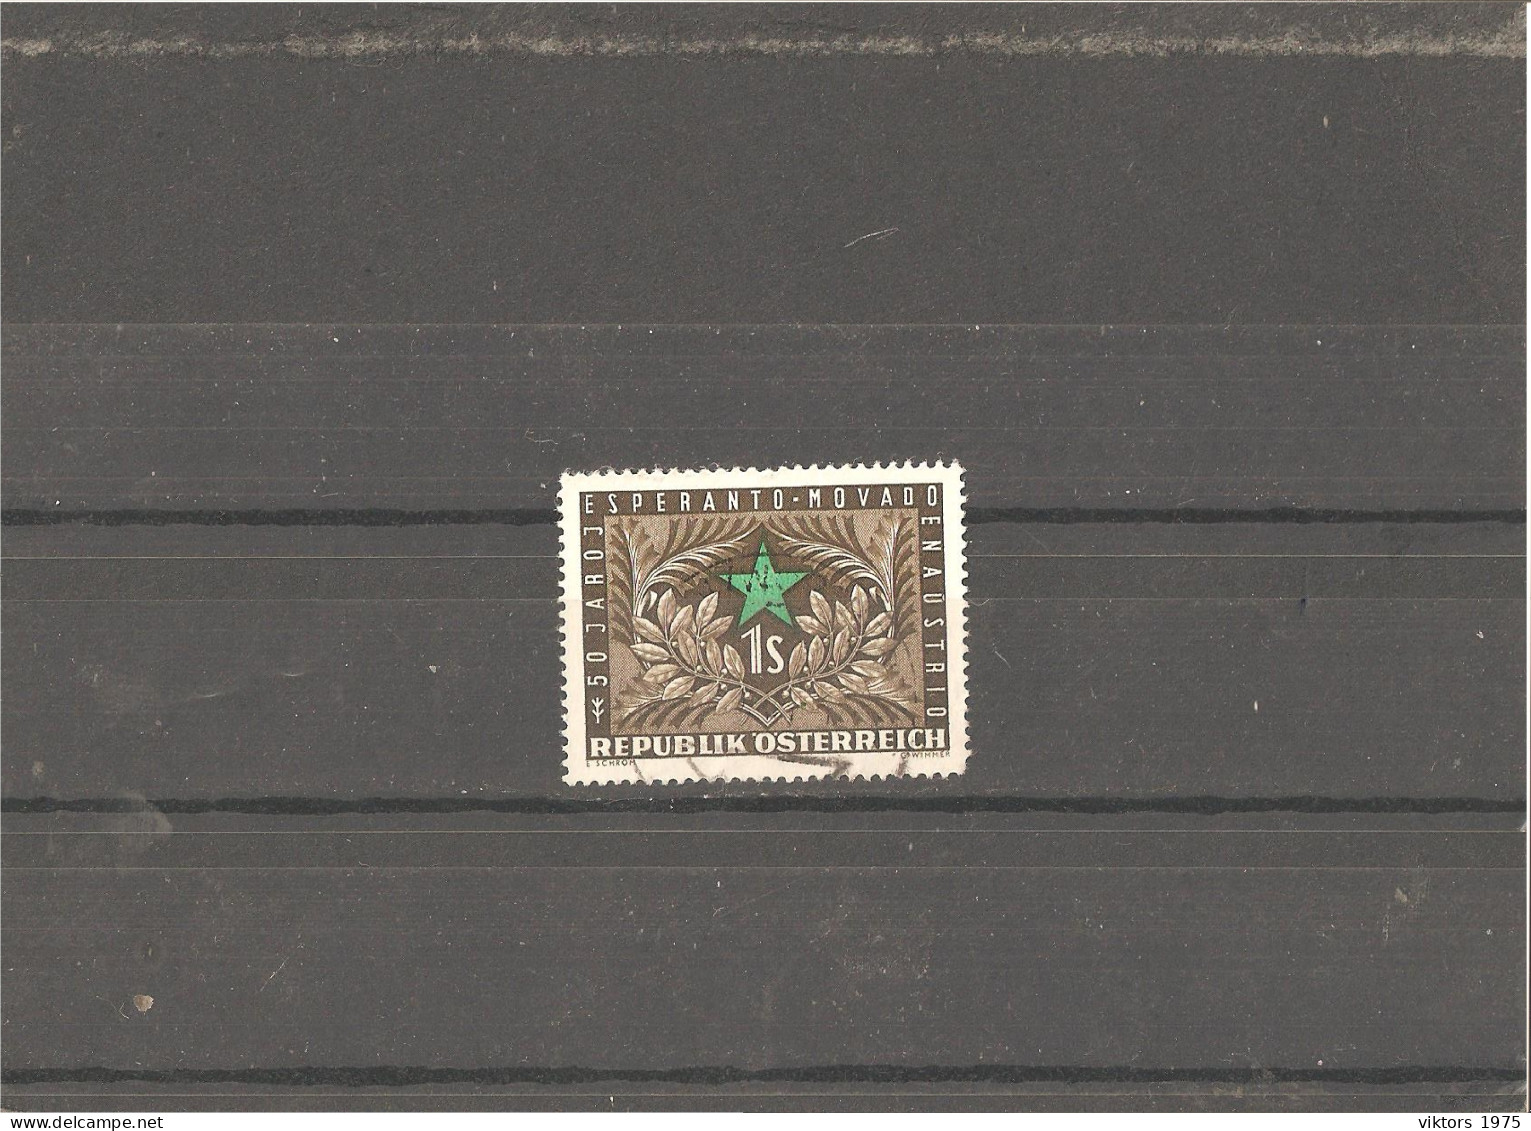 Used Stamp Nr.1005 In MICHEL Catalog - Used Stamps